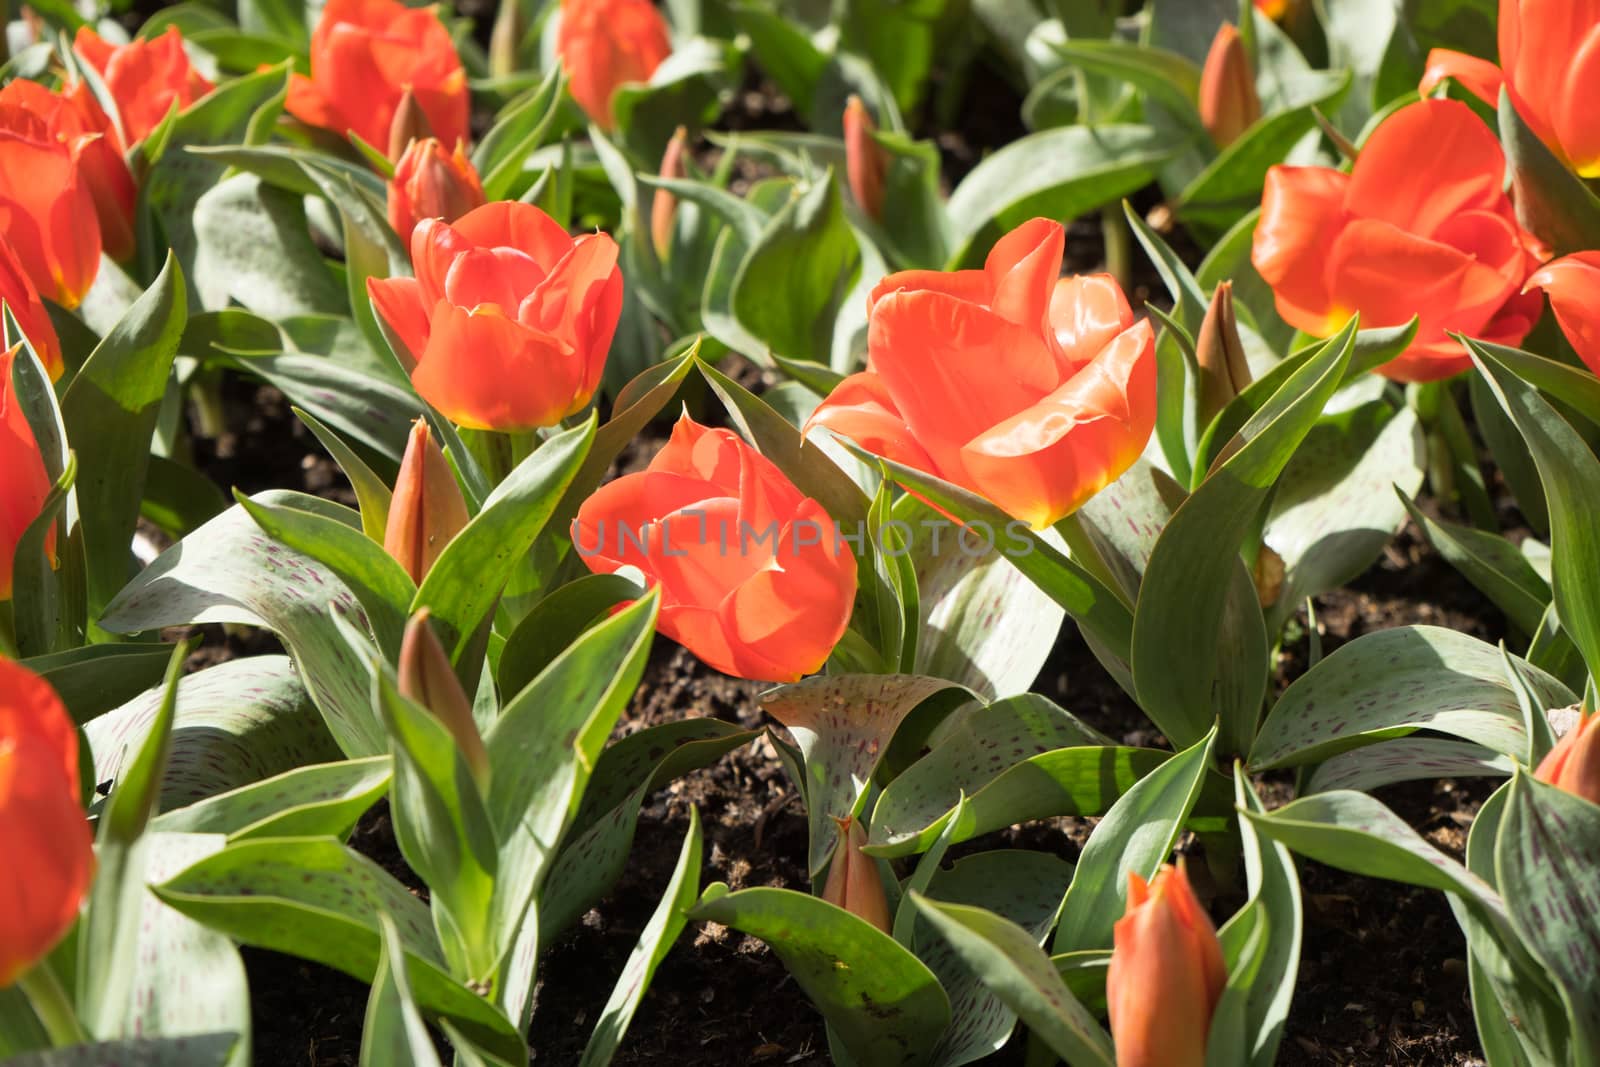 Orange tulip with a blurred background in a garden in LIsse, Netherlands, Europe on a bright summer day